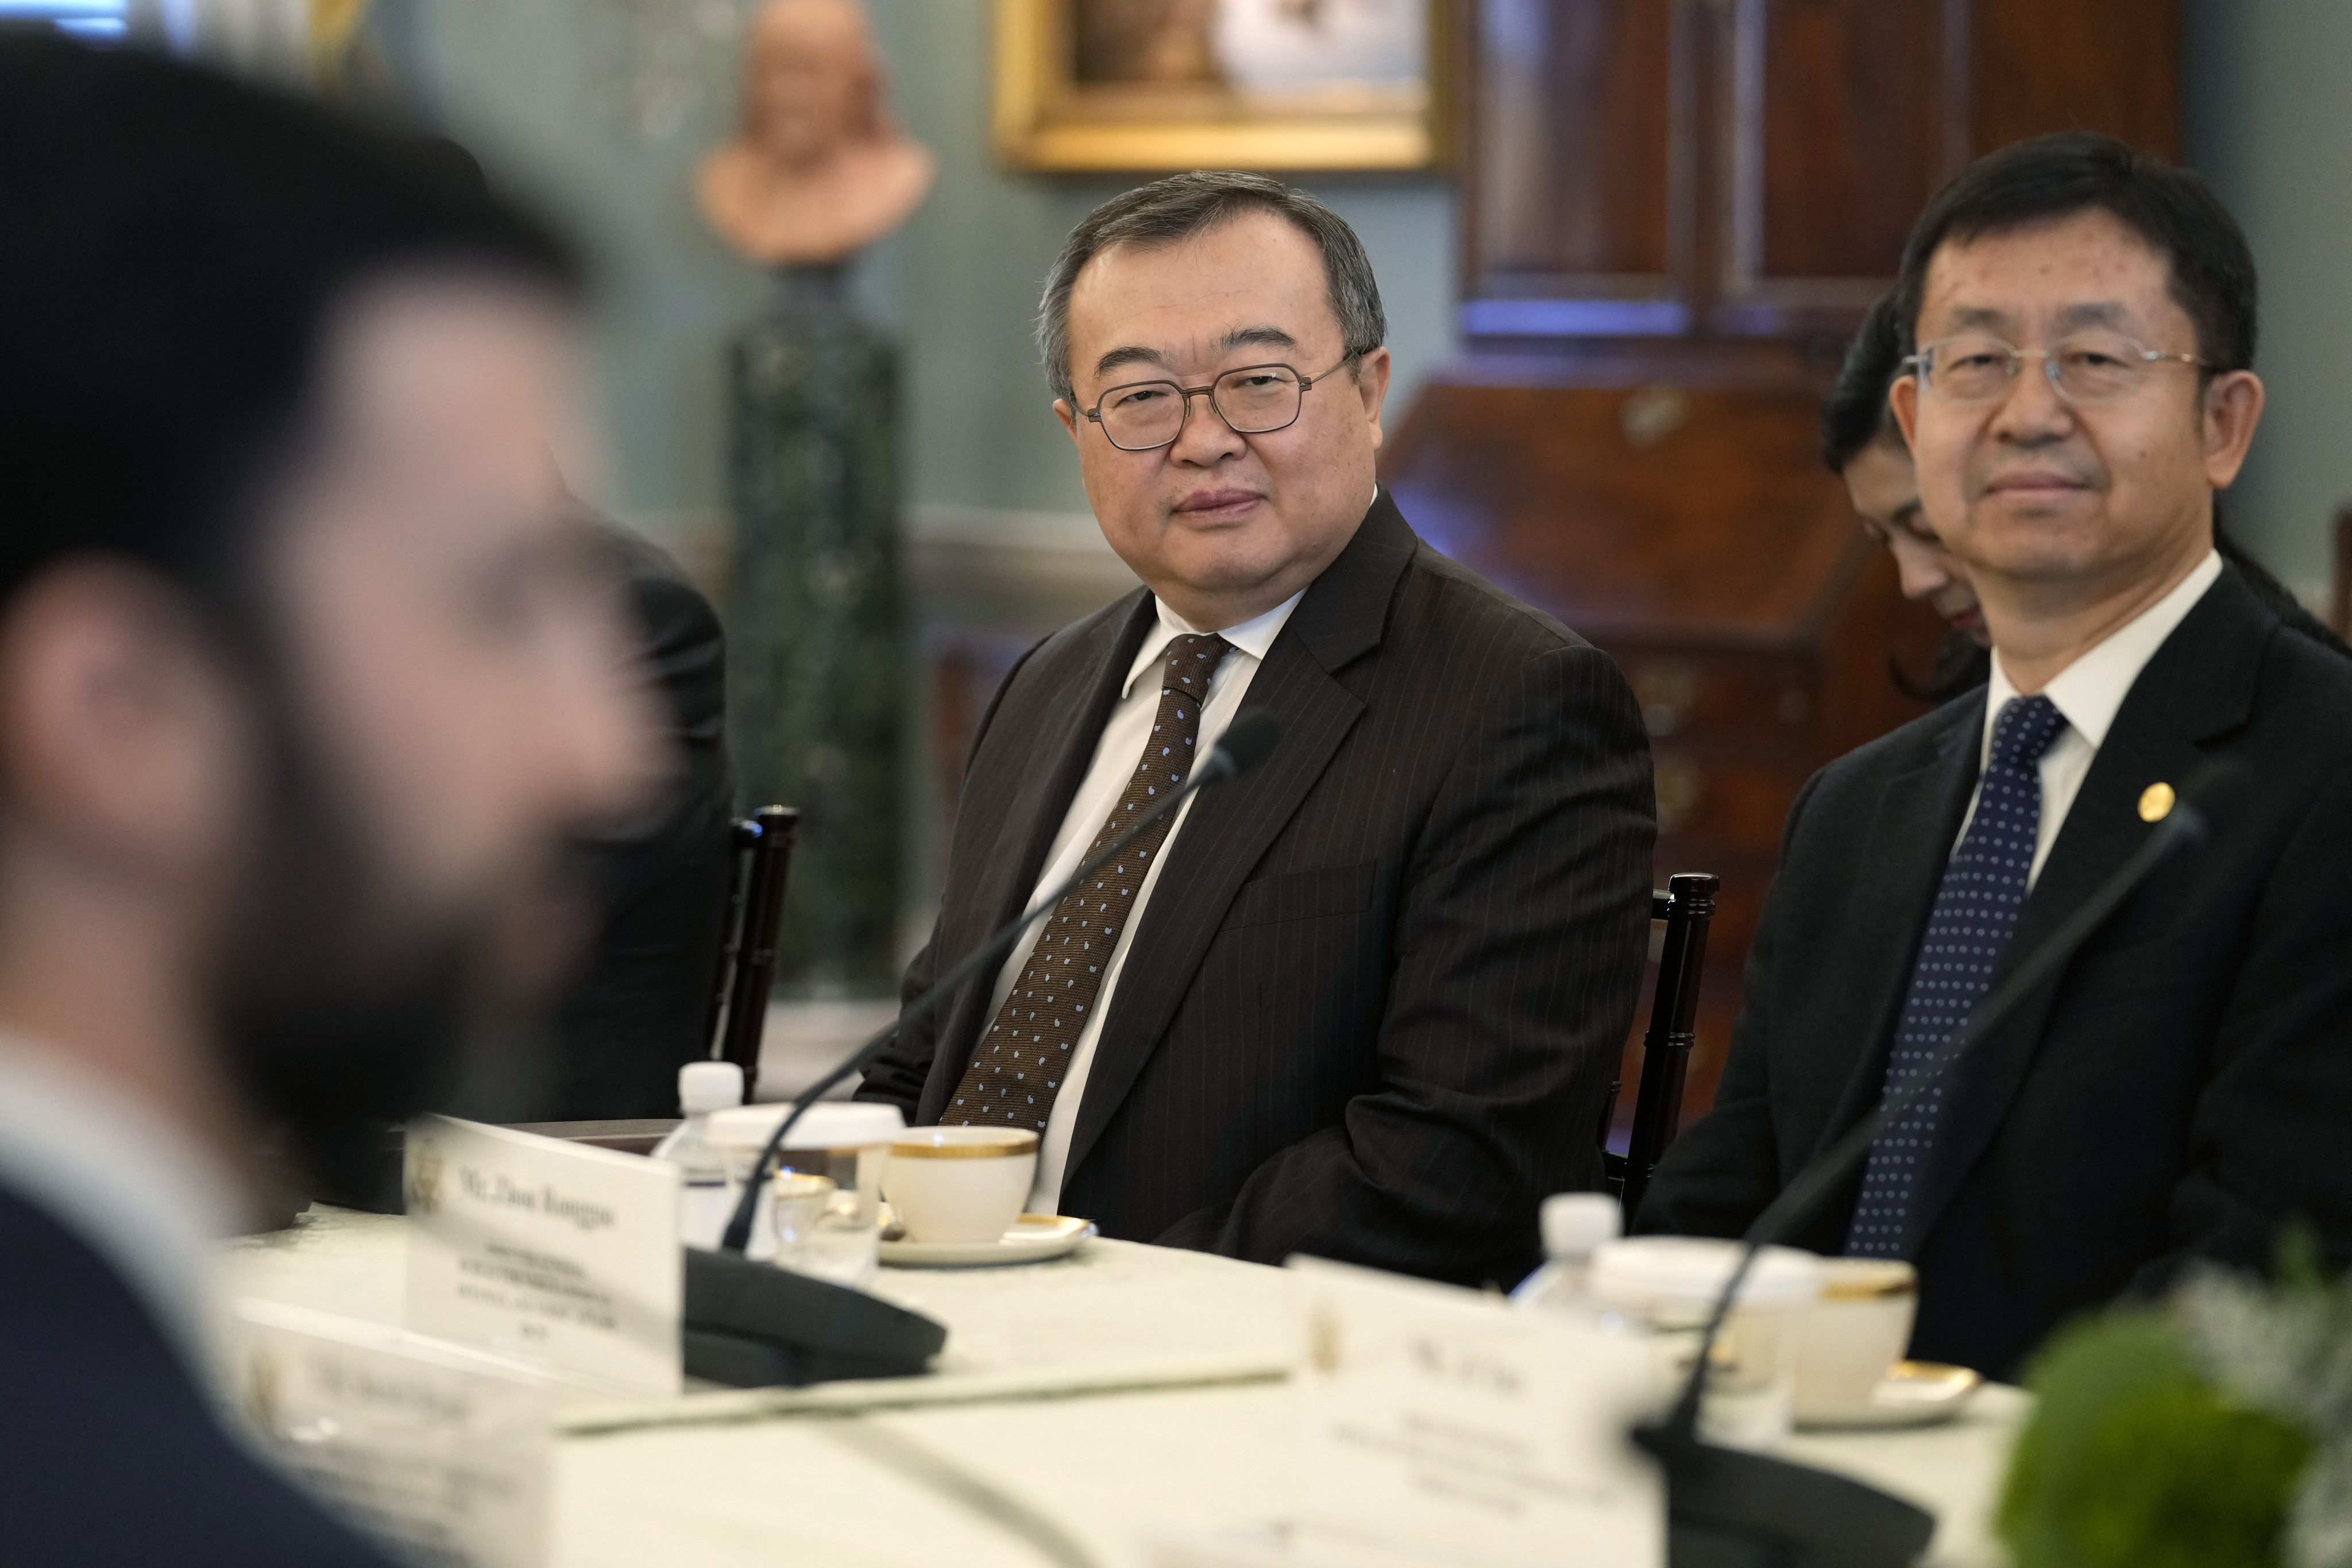 Liu Jianchao (centre), head of the Chinese Communist Party’s diplomatic arm, during his meeting with US Secretary of State Antony Blinken in Washington on the eve of the Taiwanese election. Photo: AP